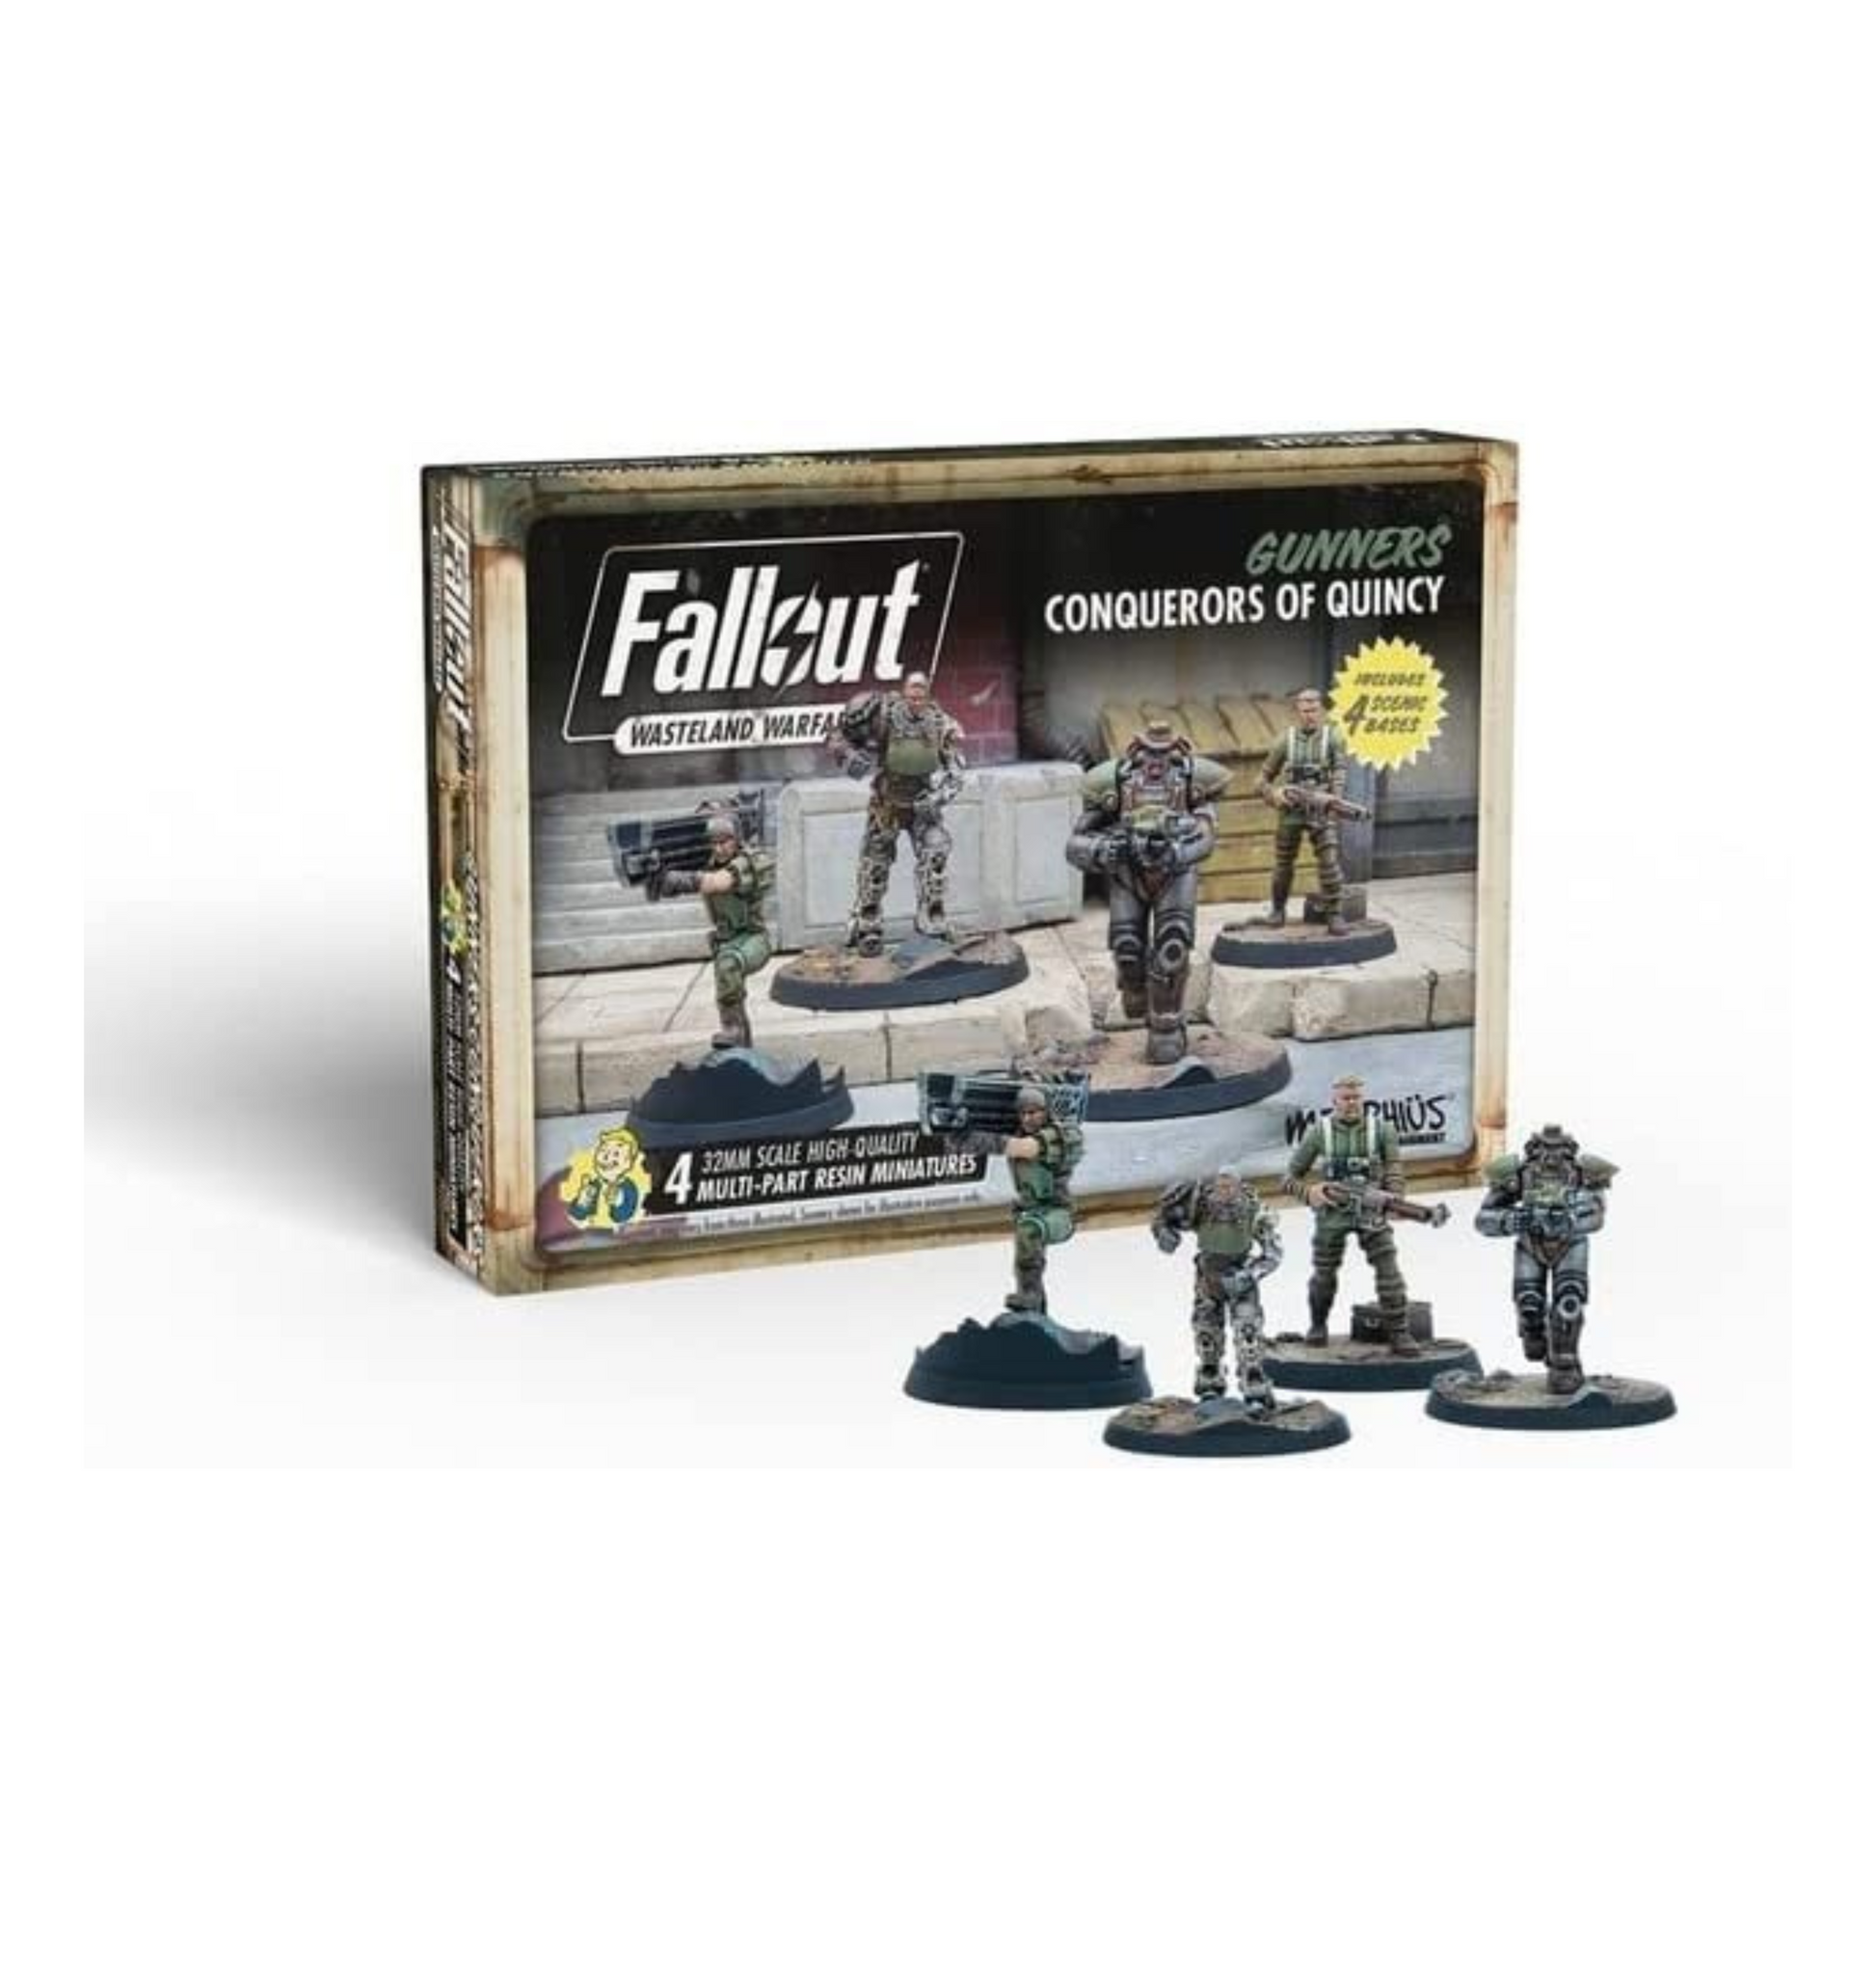 Fallout Wasteland Warfare: Gunners Conquerors of Quincy